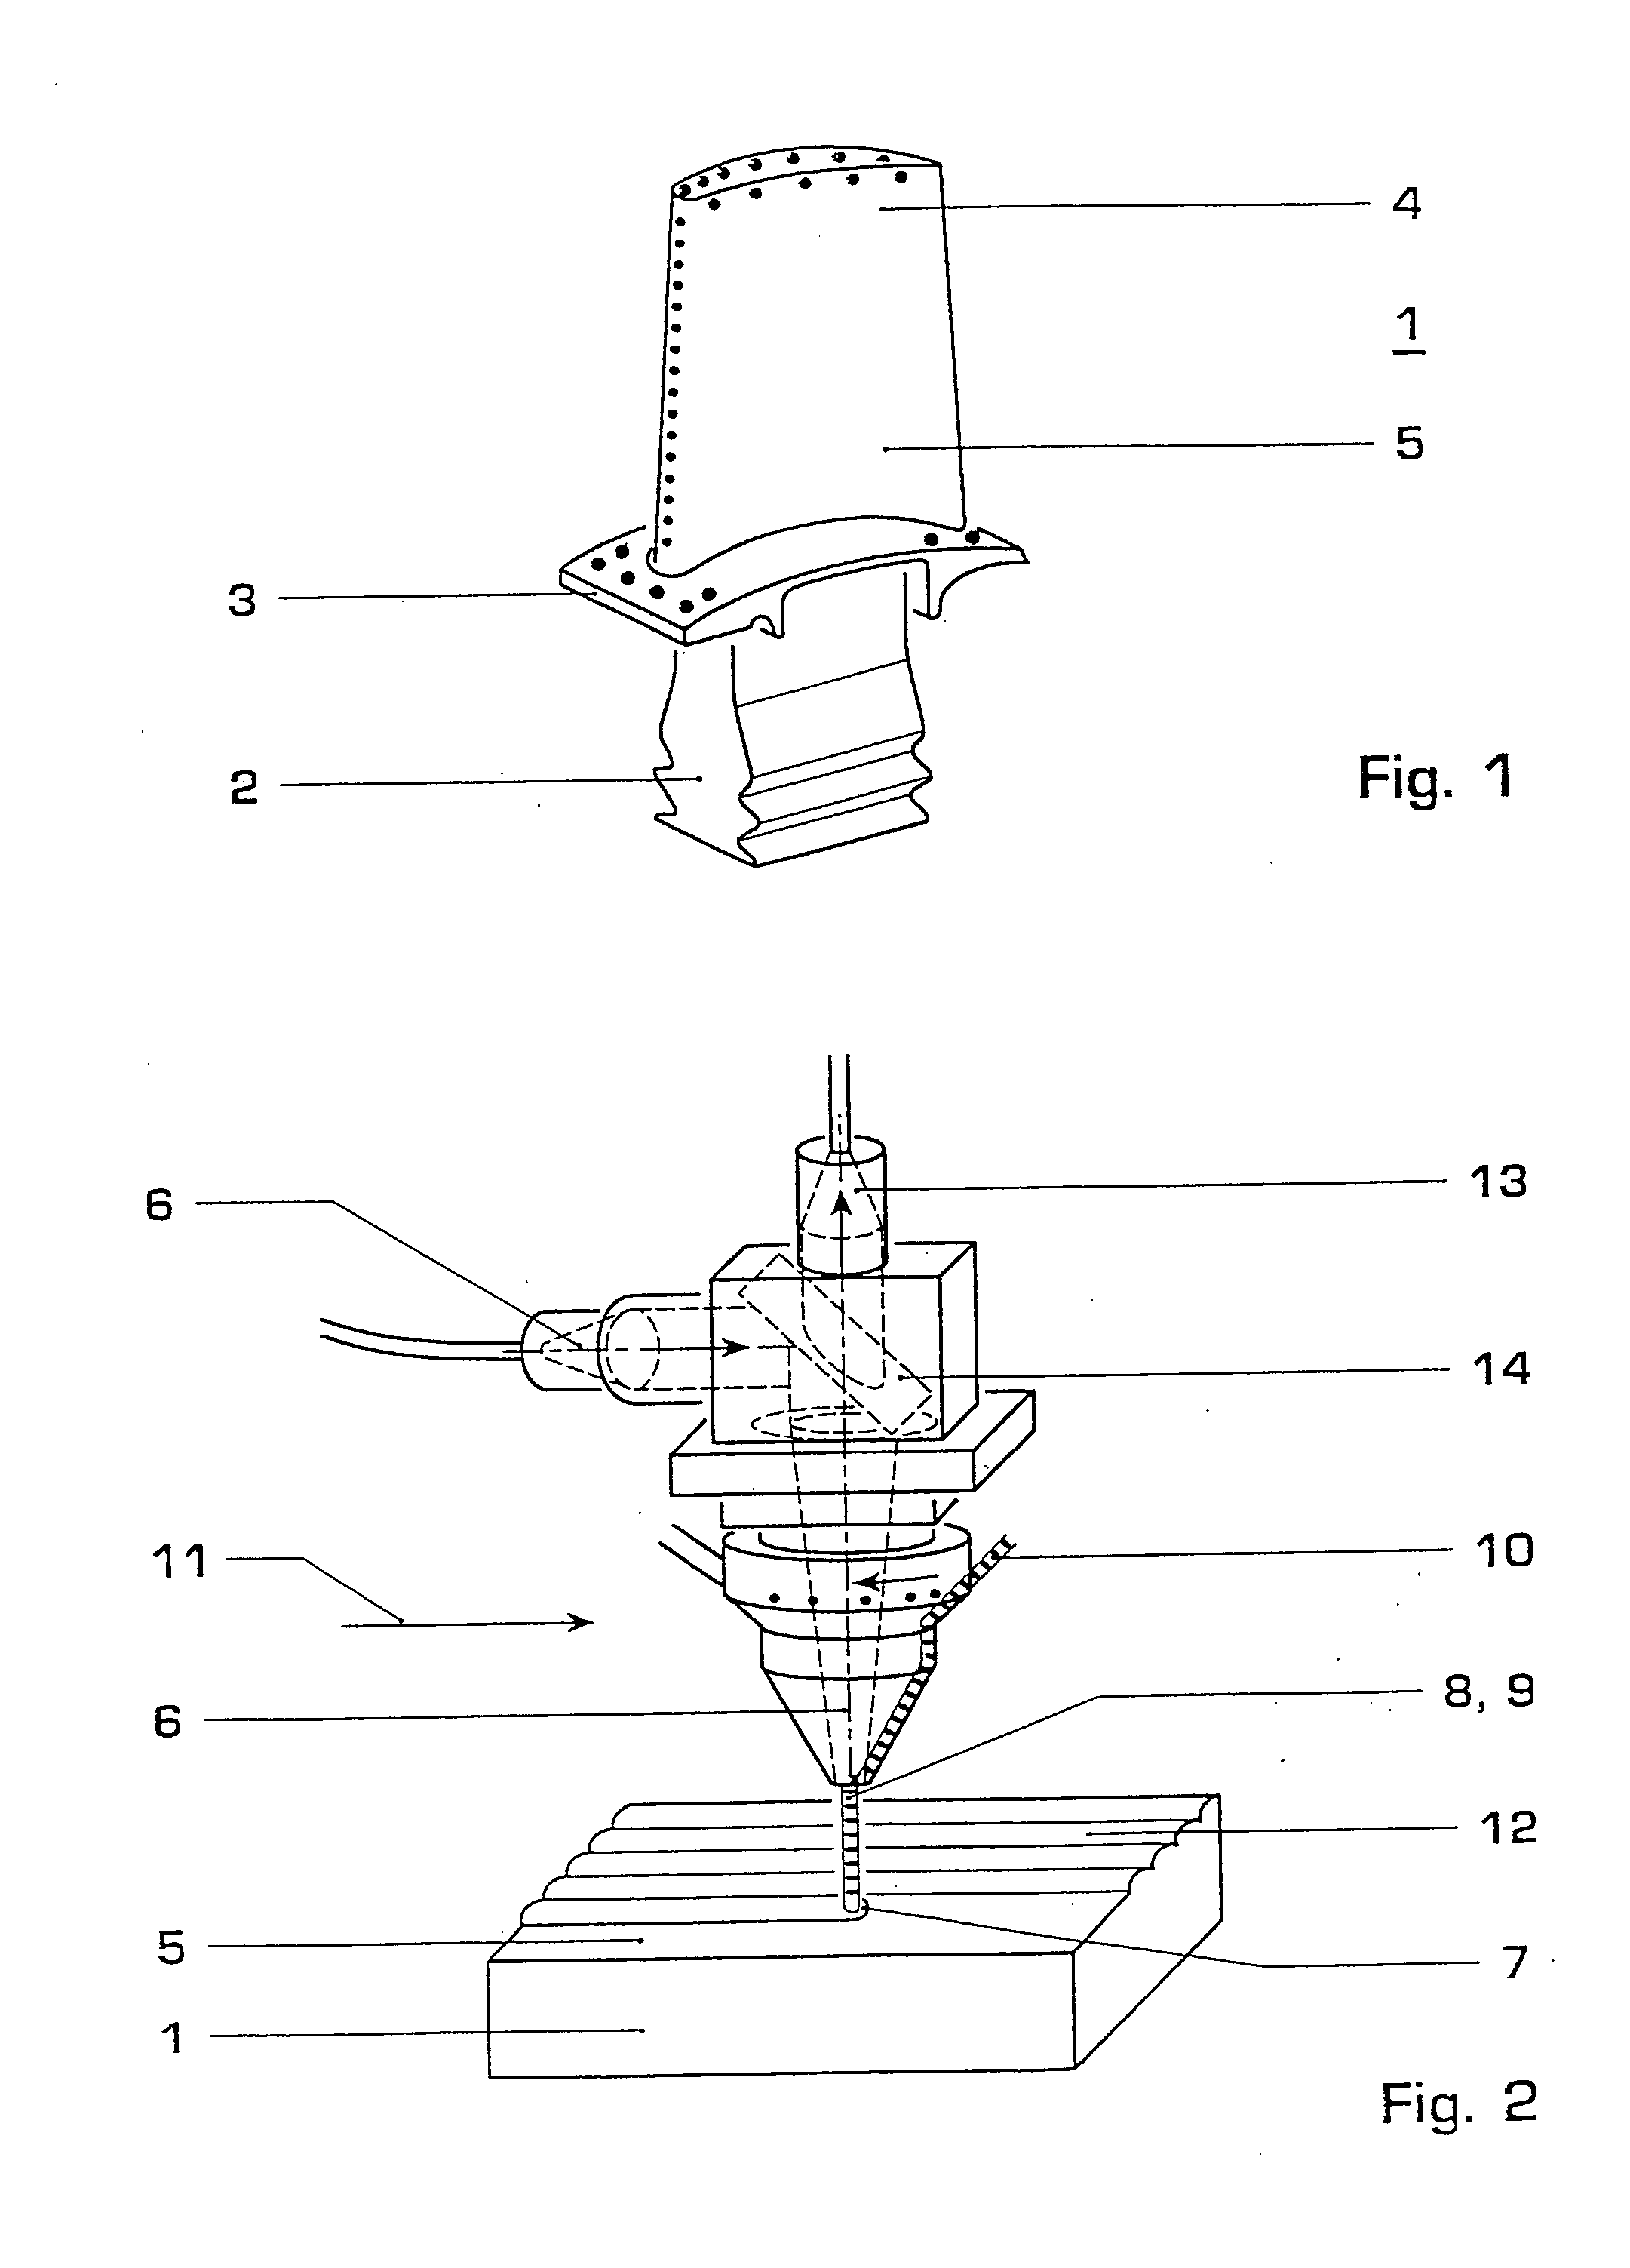 Method of controlled remelting of or laser metal forming on the surface of an article